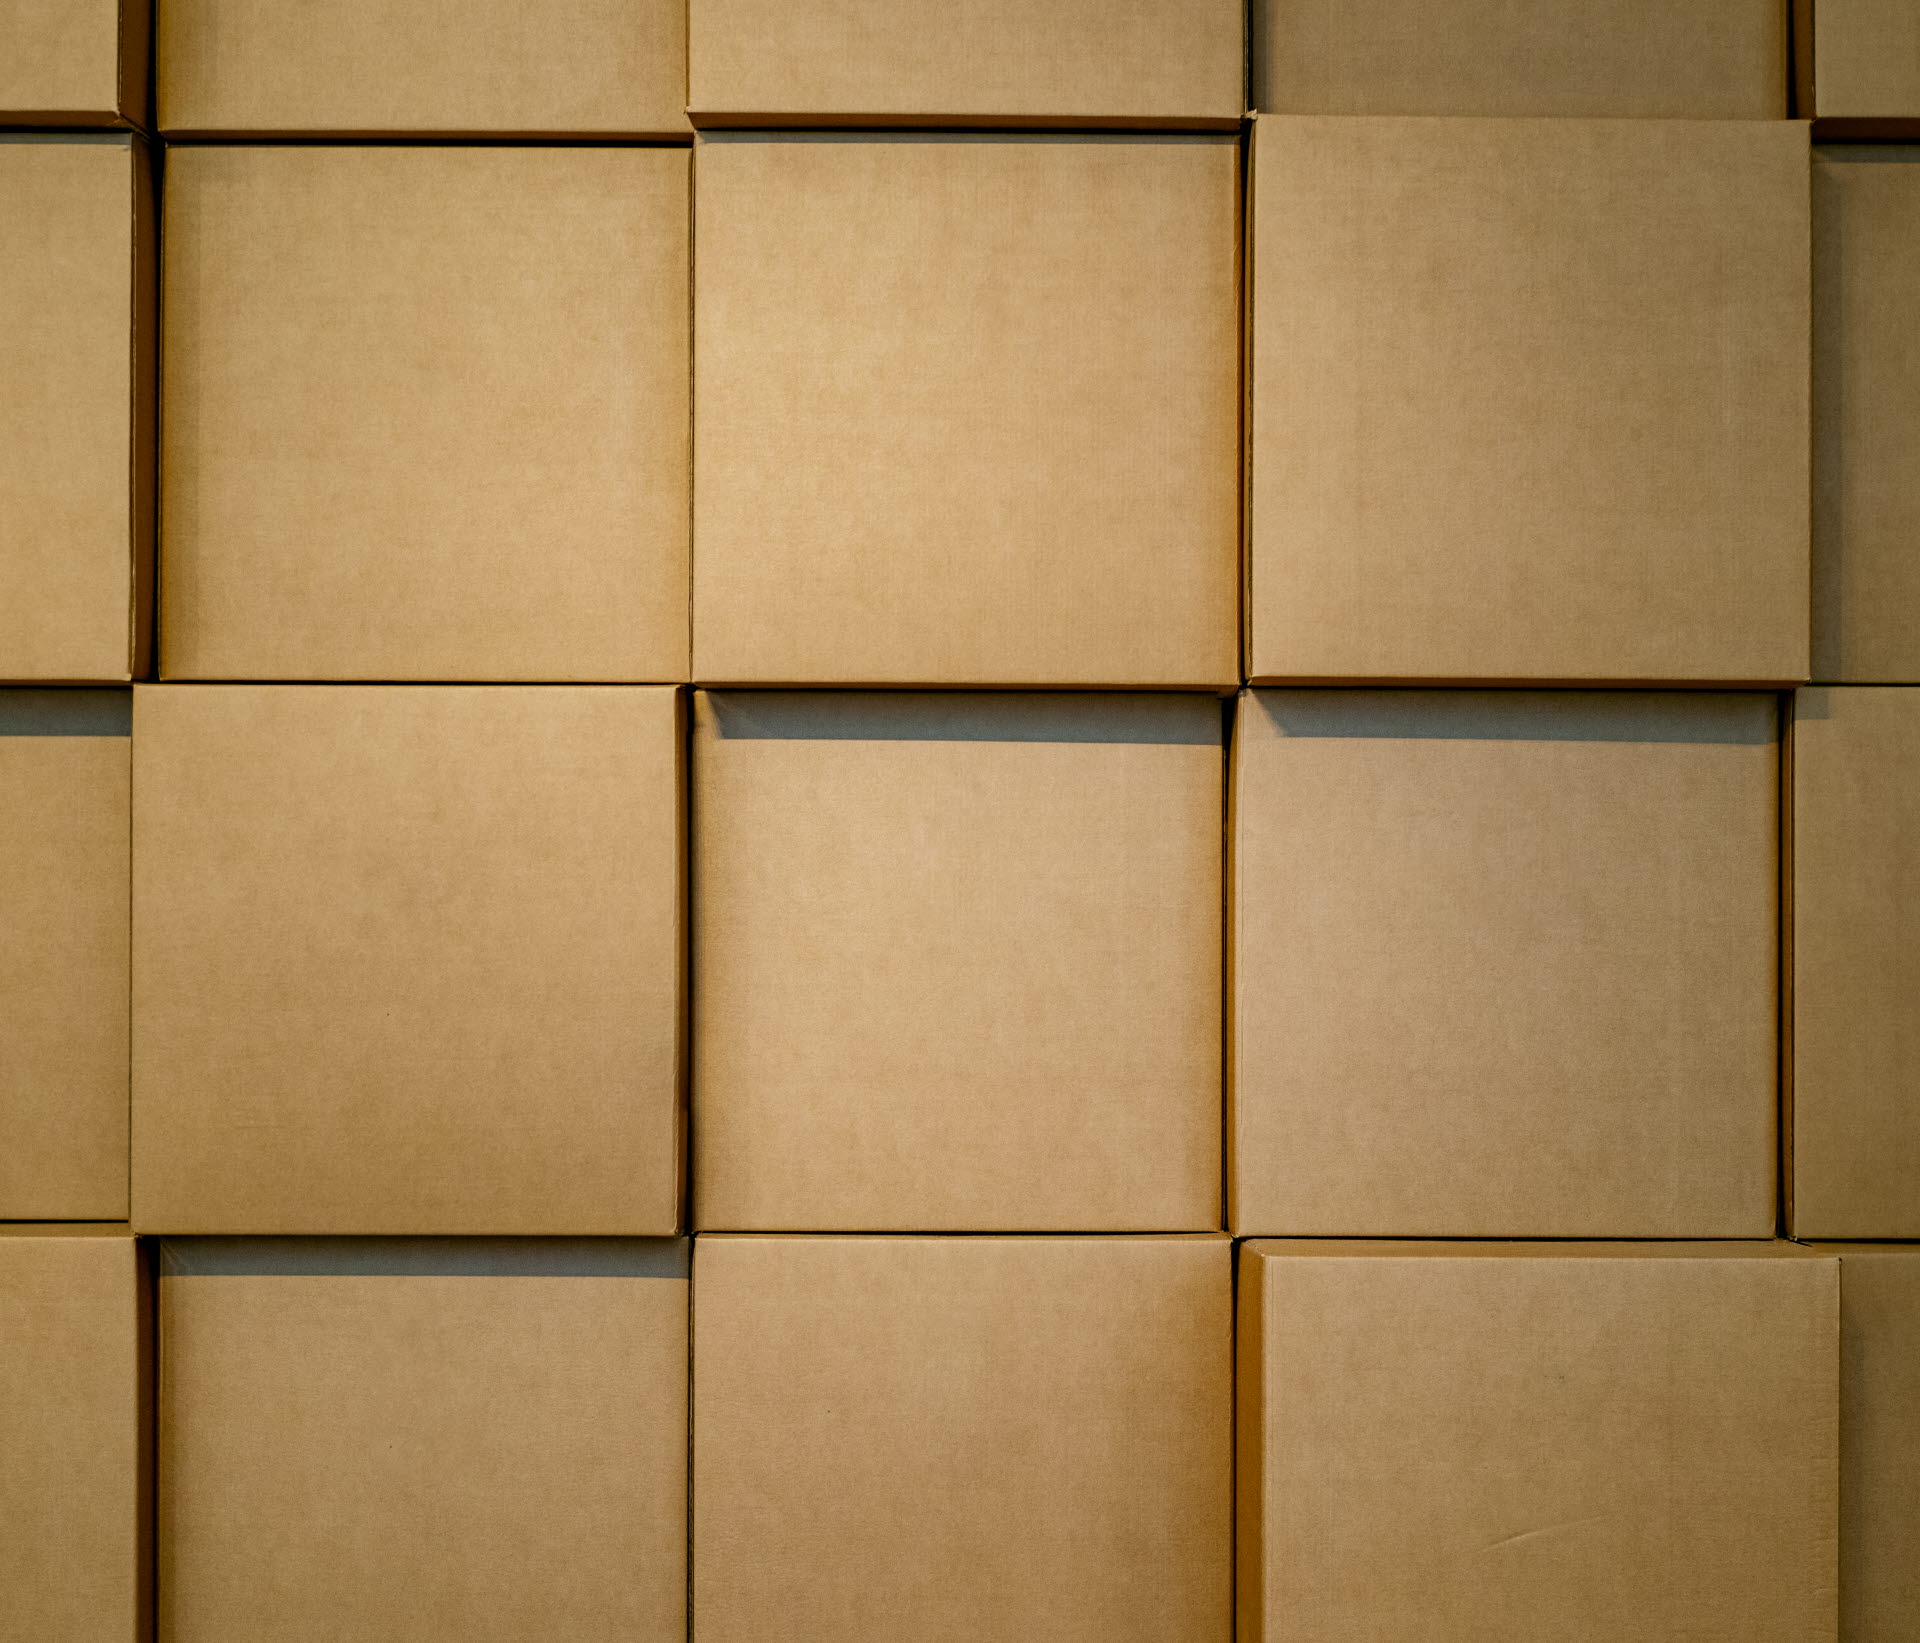 Corrugated boxes loaded on top of each other